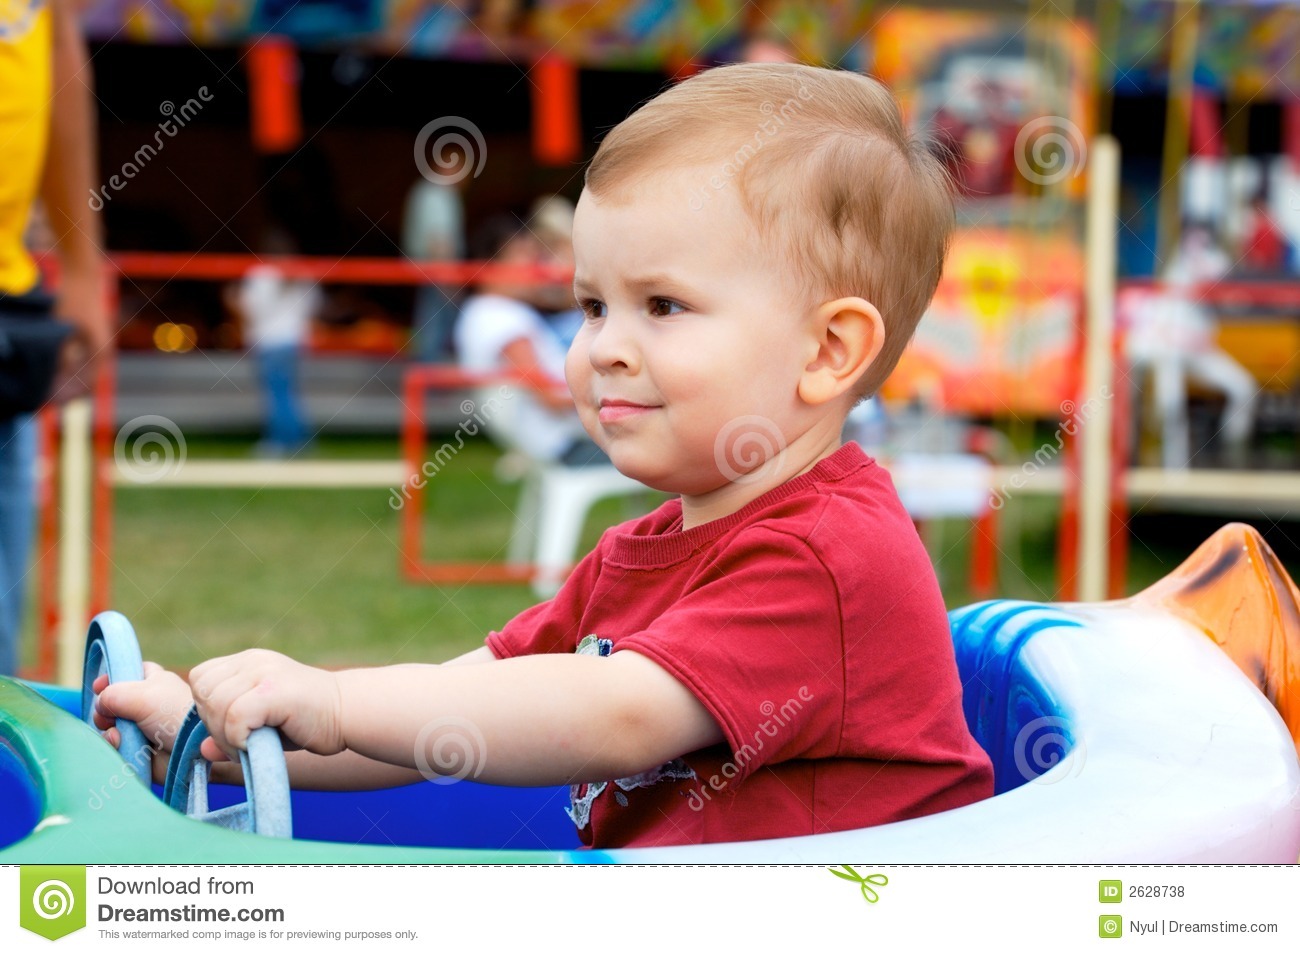 Child Driving Toy Car Royalty Free Stock Photos   Image  2628738